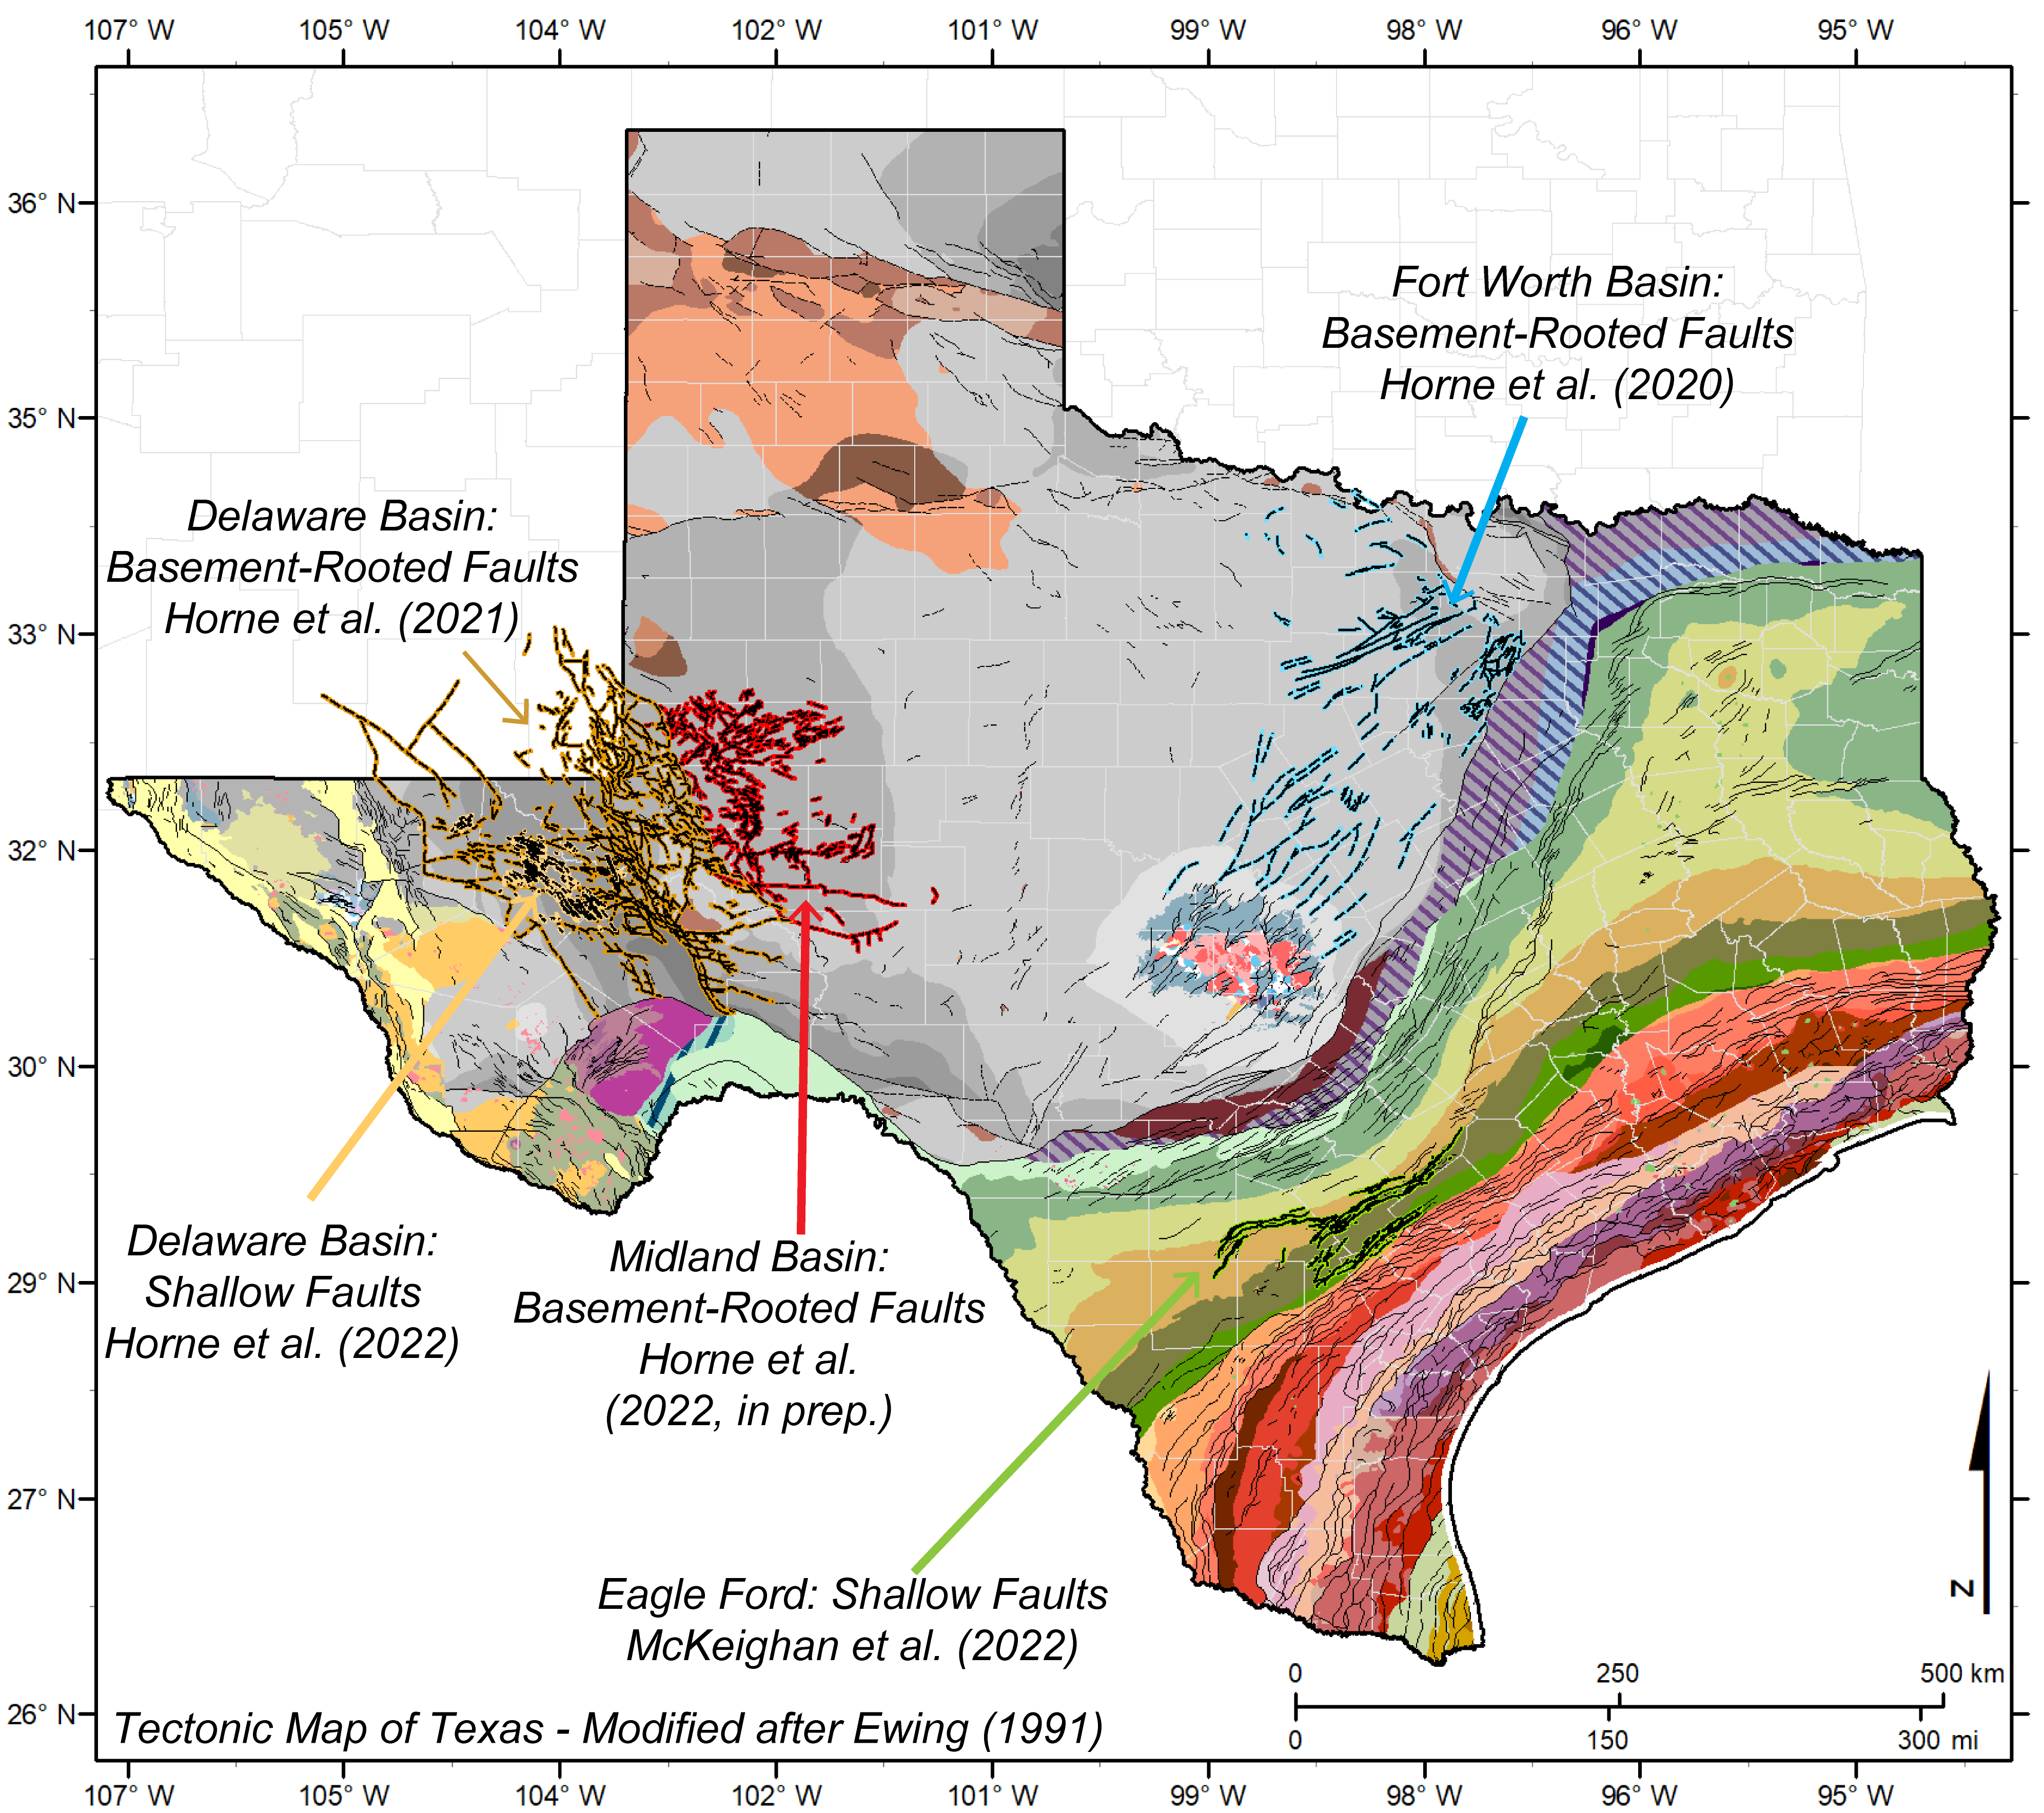 TexNet-CISR fault mapping